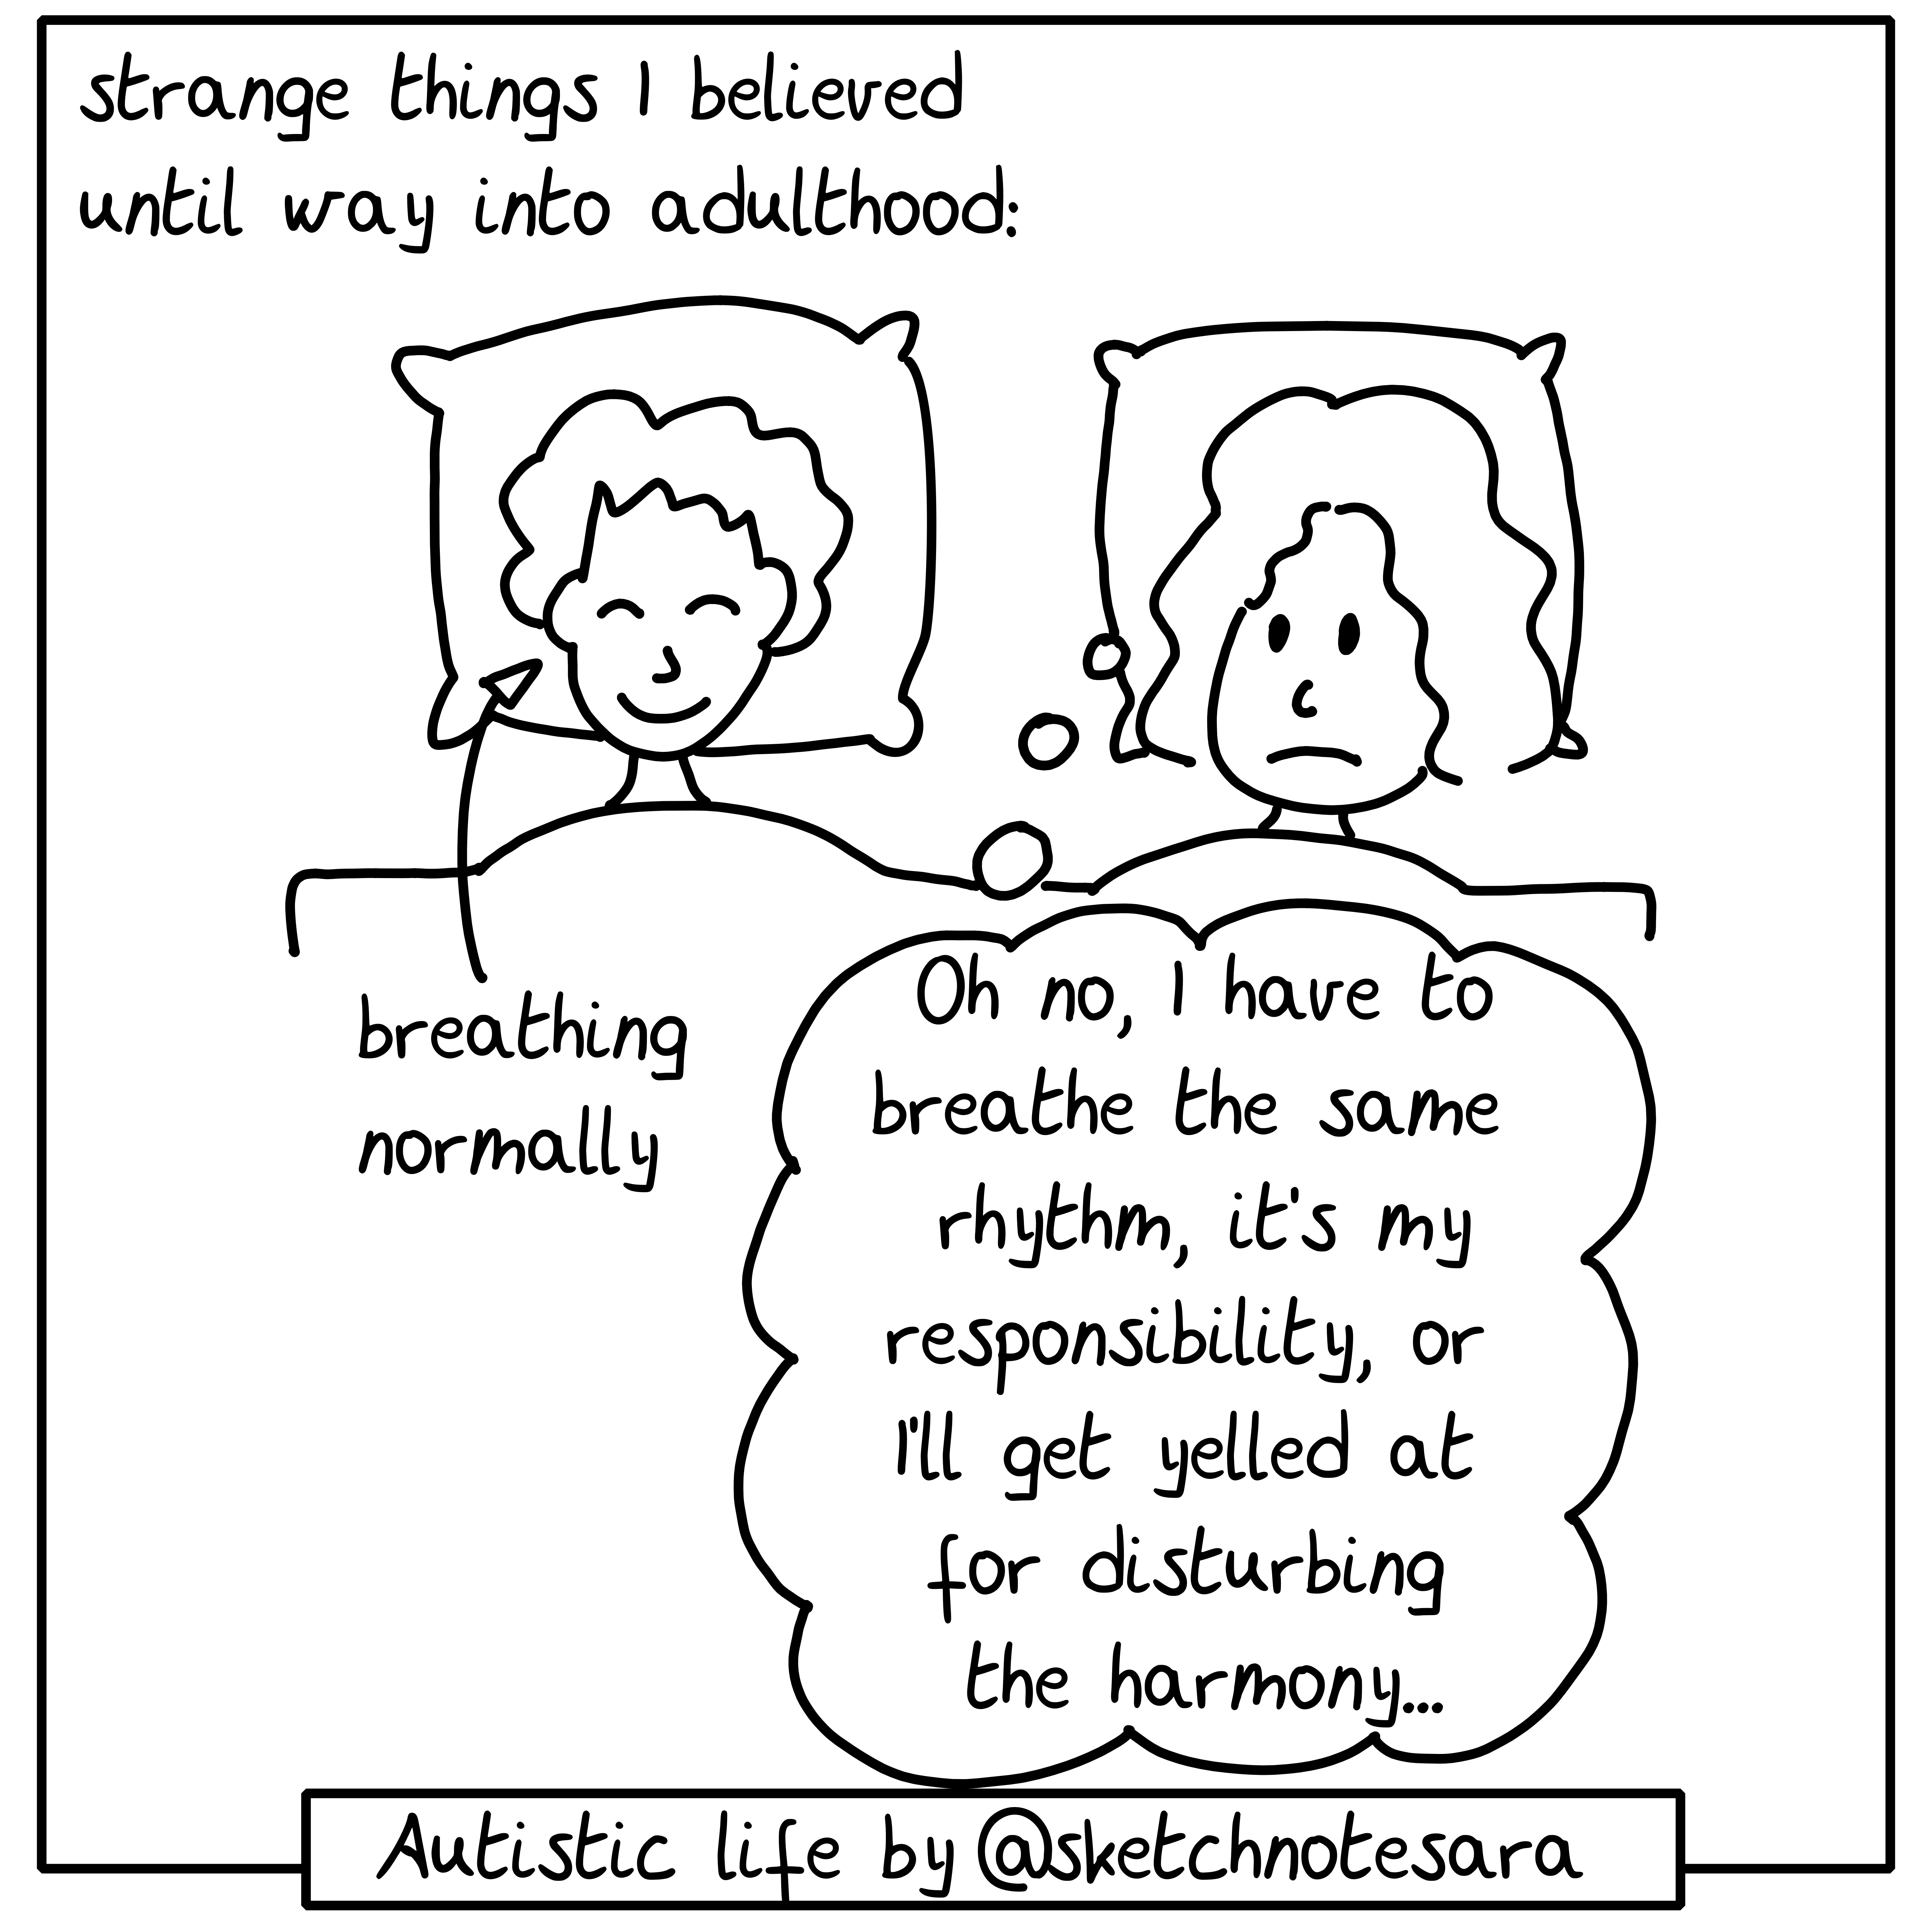 Sketchnote of Comics about Sensory issues as an autistic